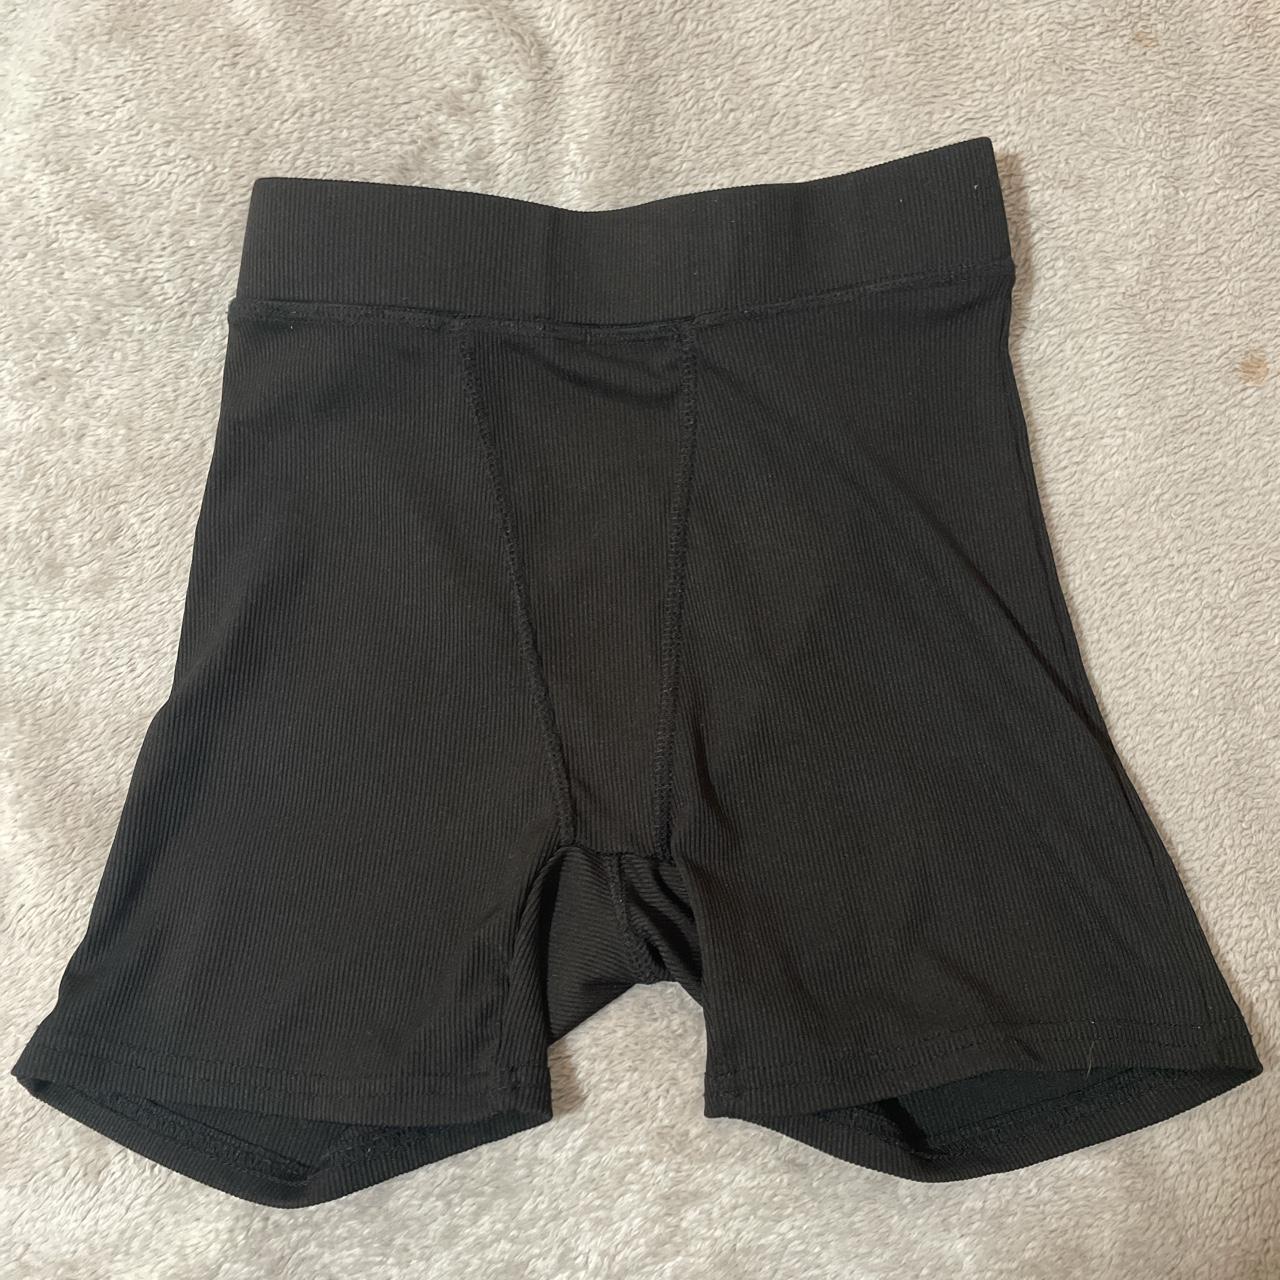 Skims style boxer shorts Not from skims just look... - Depop